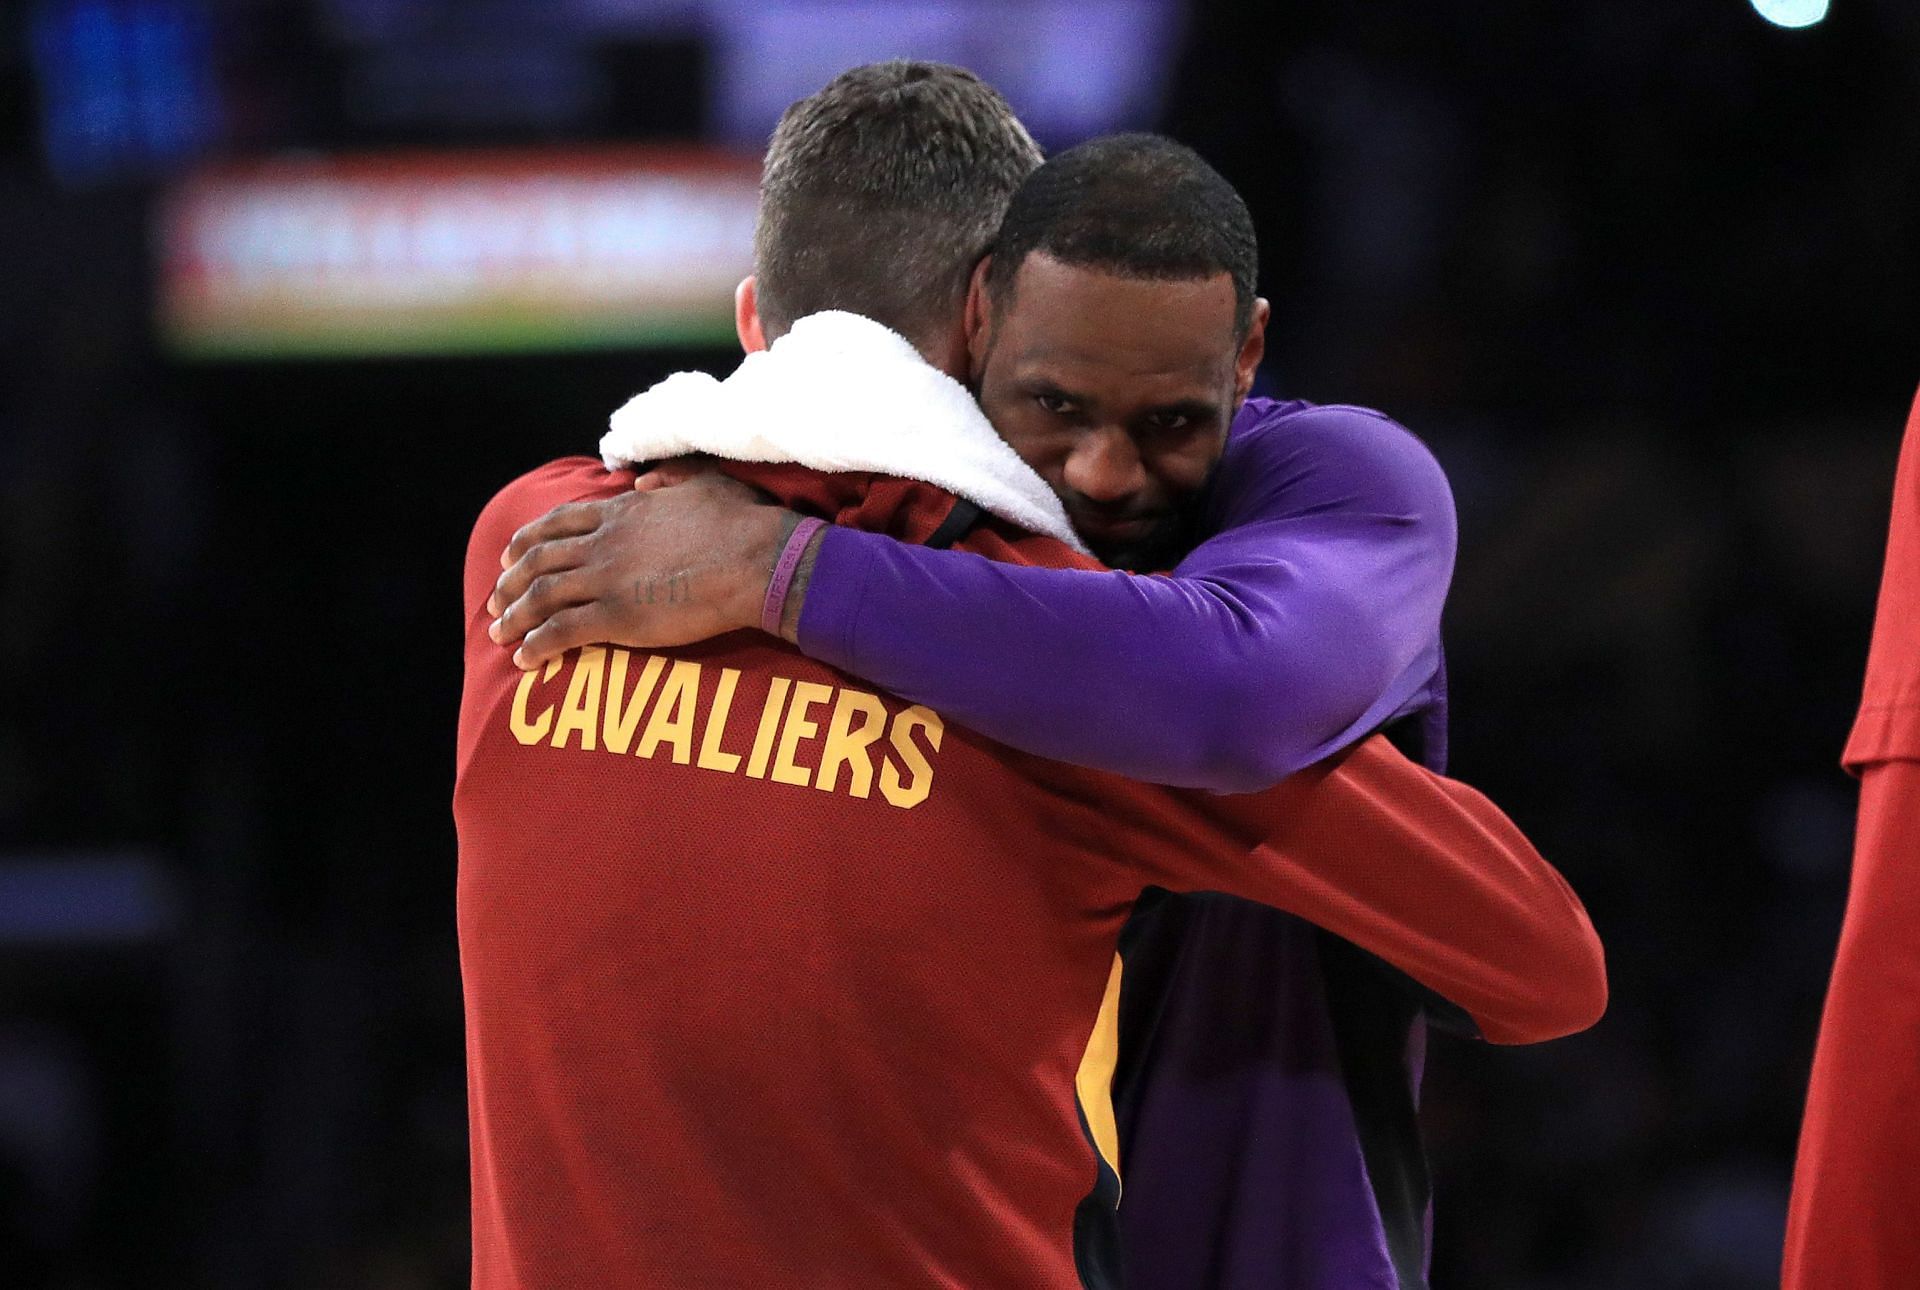 Kevin Love of the Cleveland Cavaliers hugs LeBron James of the Los Angeles Lakers.